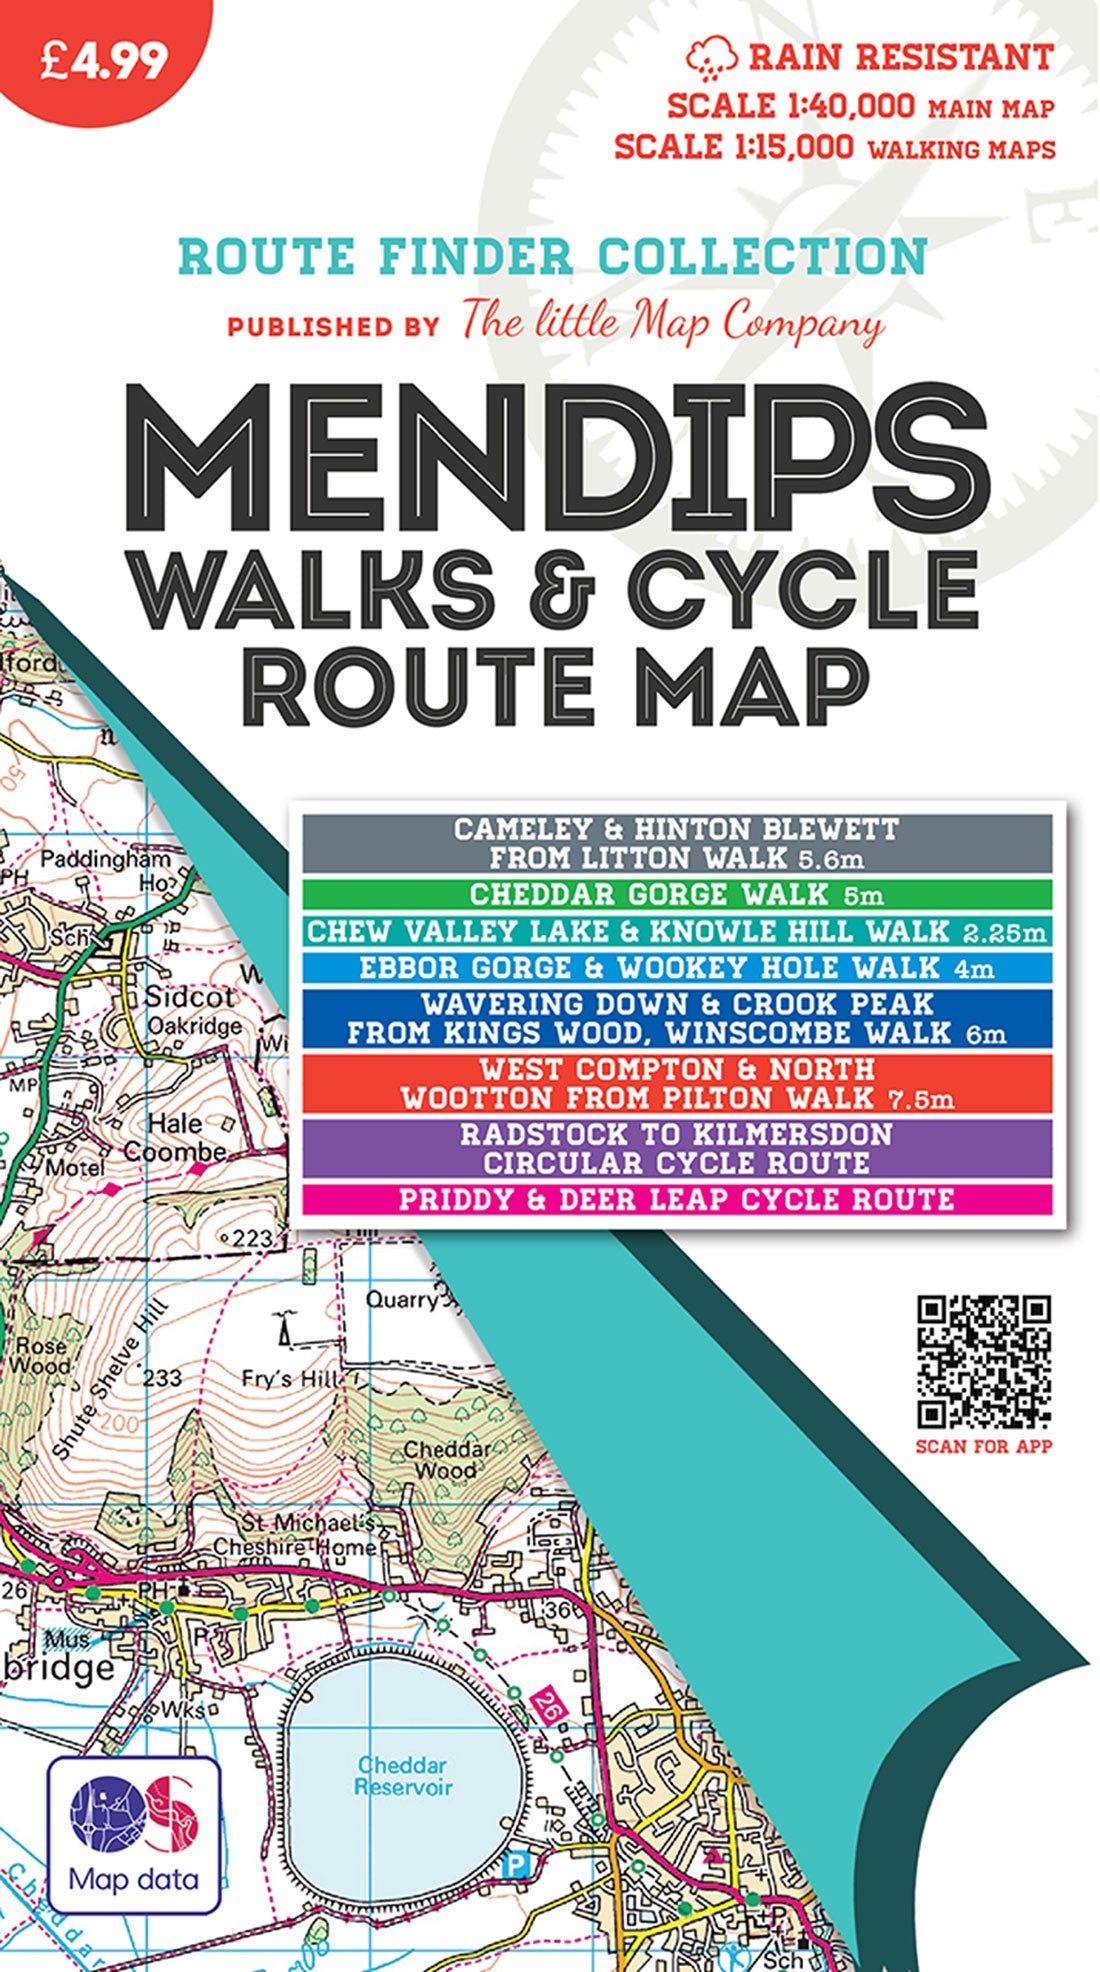 tour of the mendips